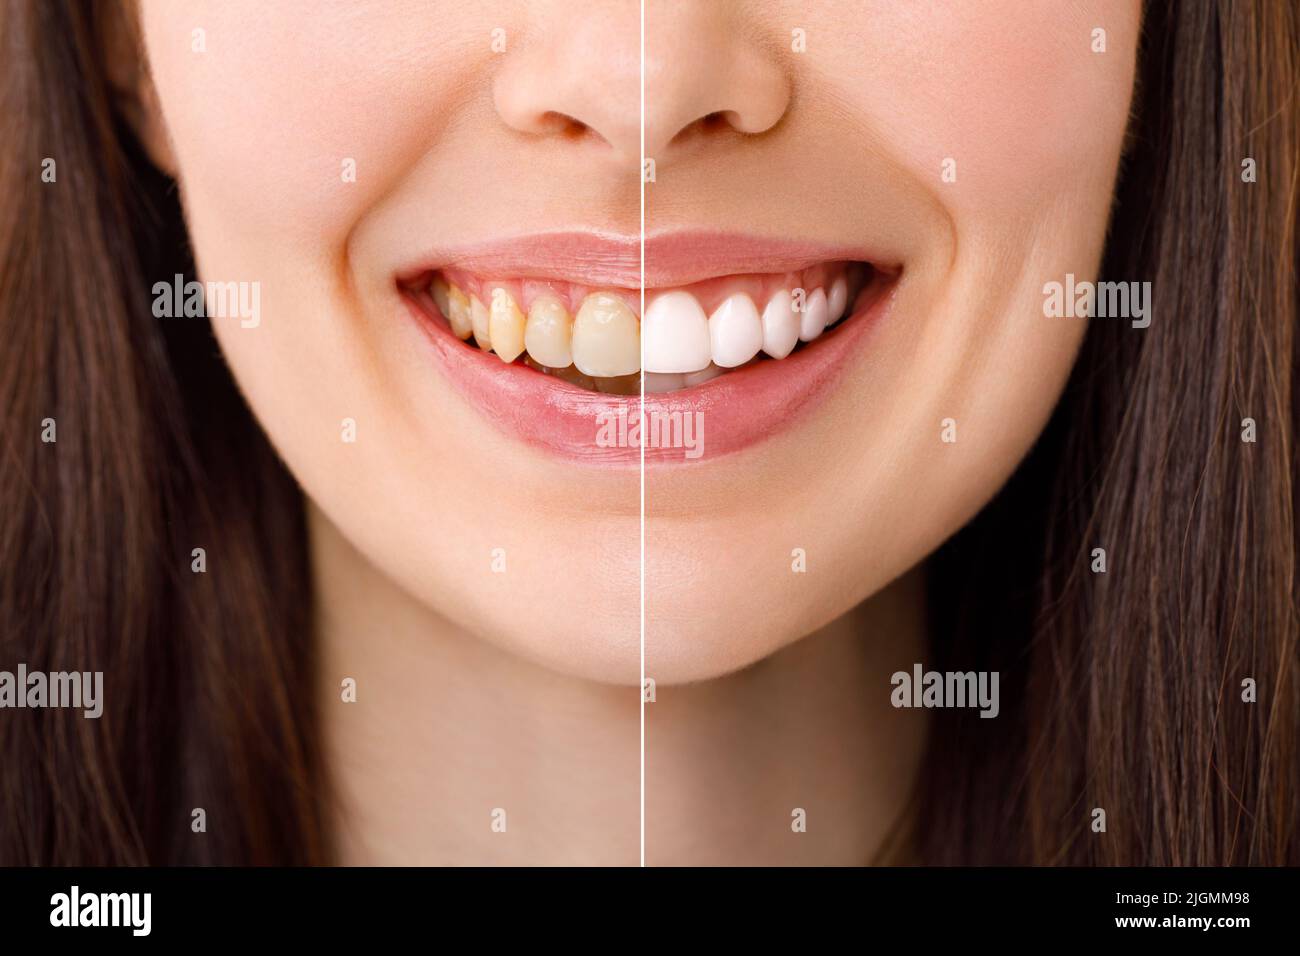 Smiling woman before and after the teeth whitening procedure, close-up image. Stock Photo